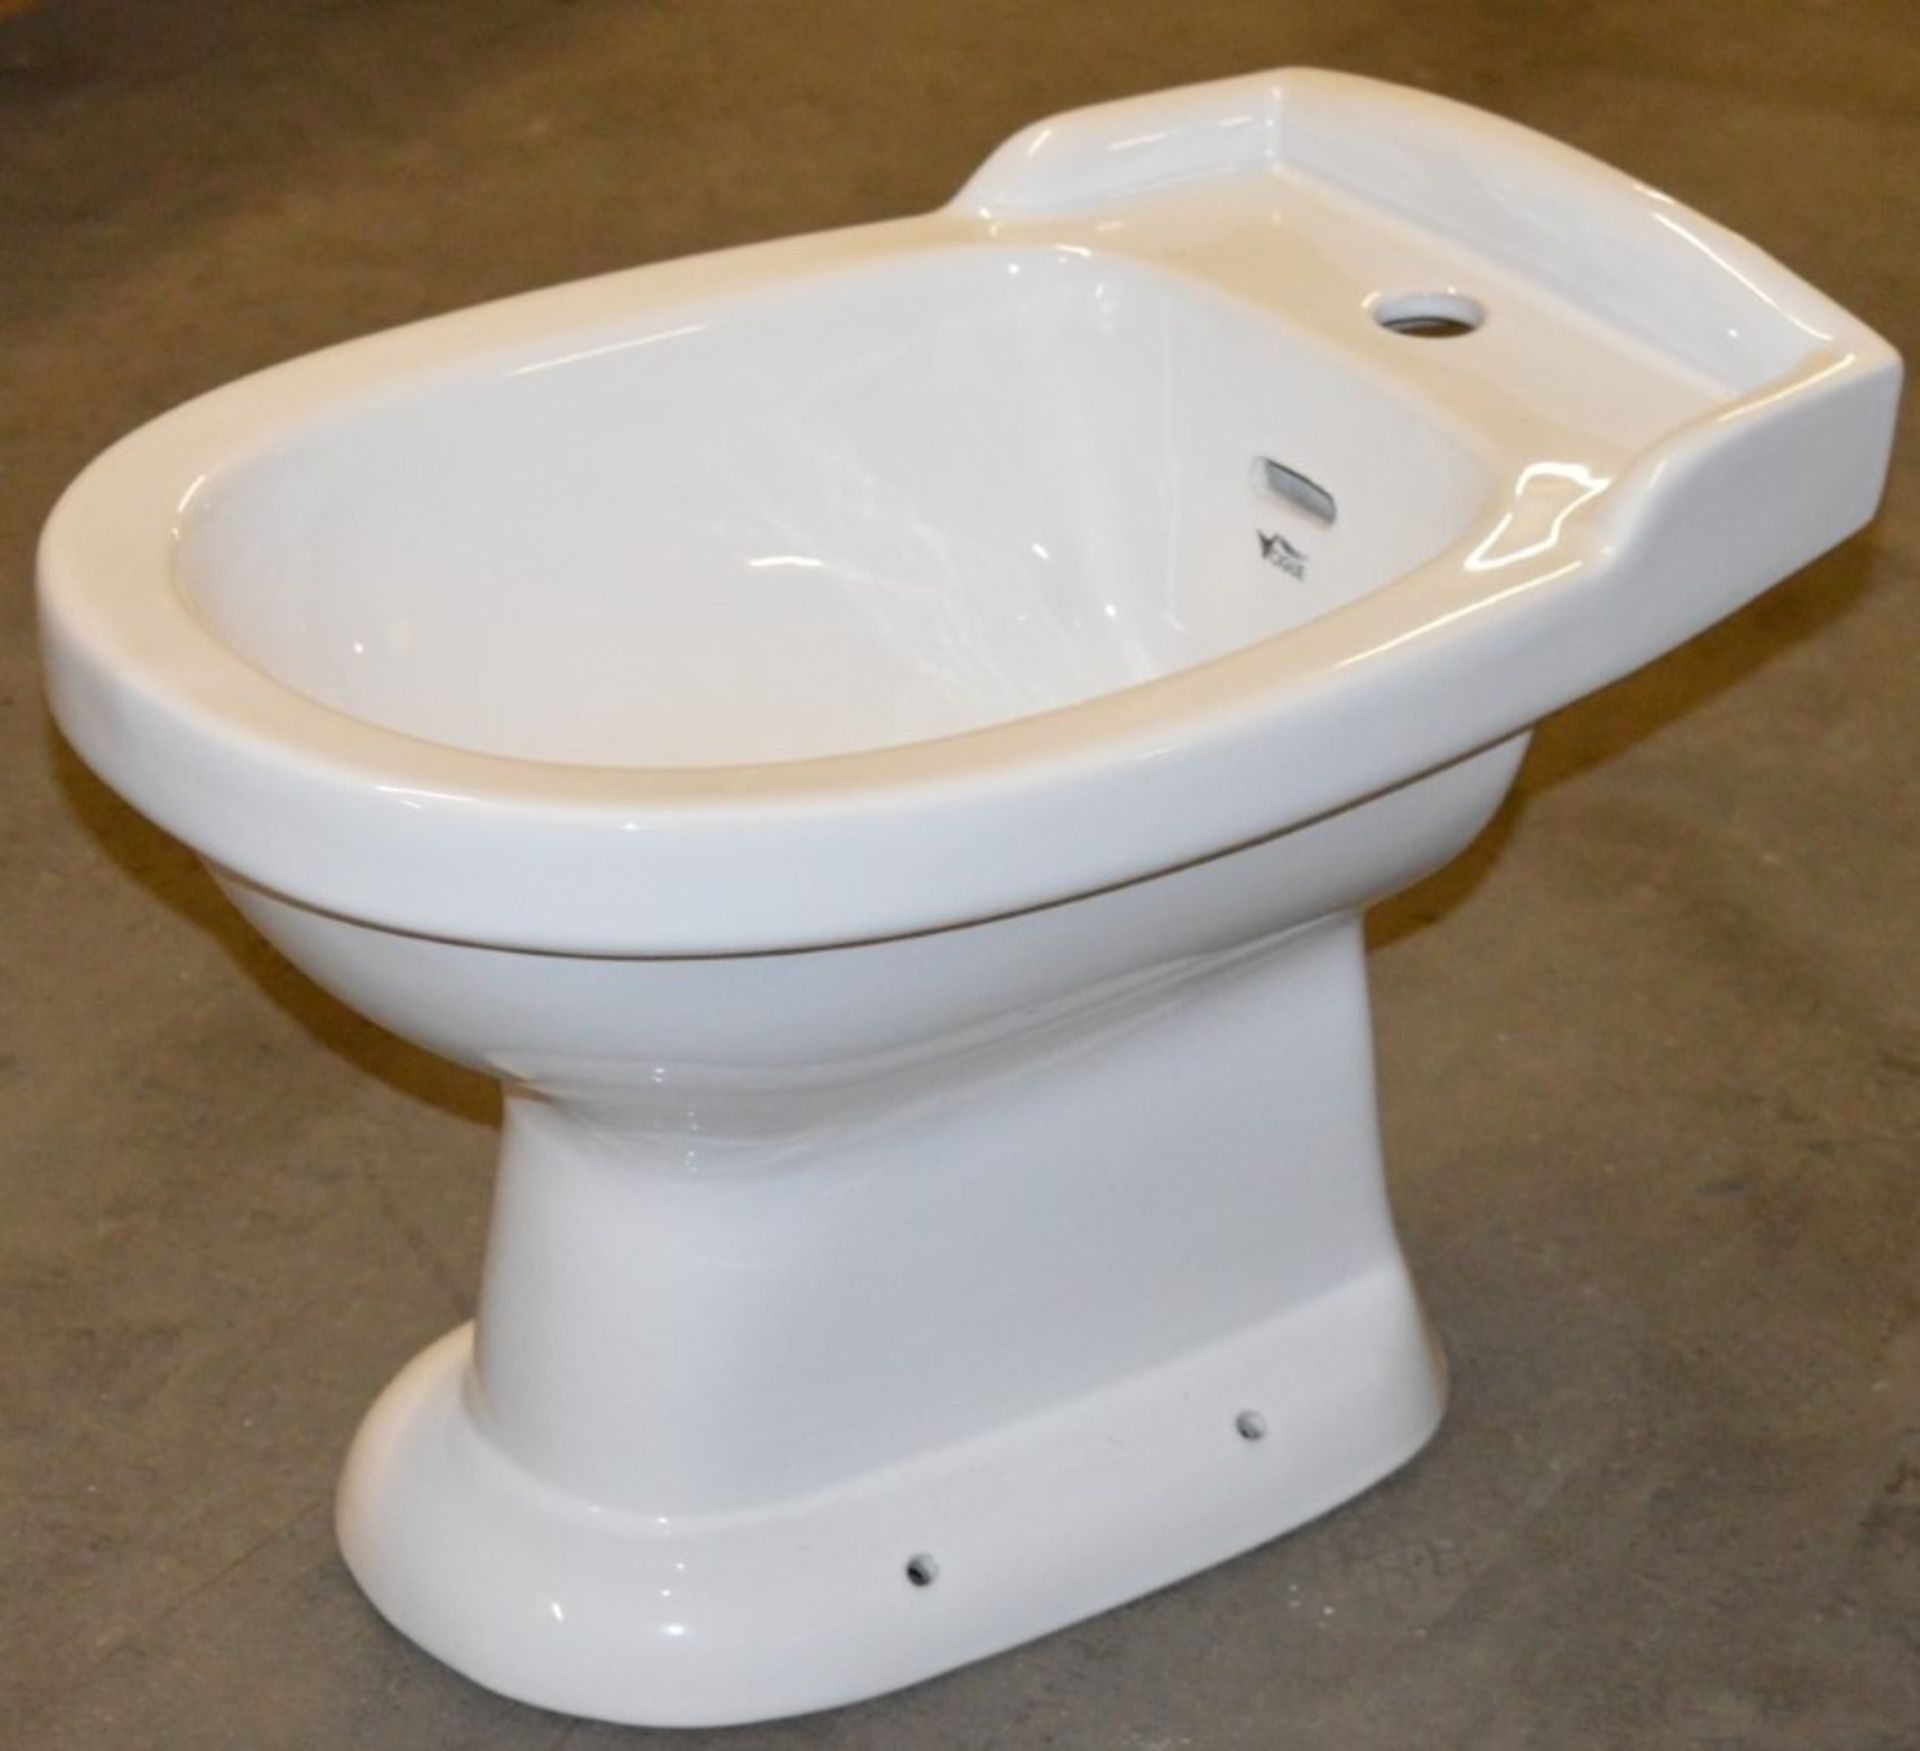 1 x Vogue Bathrooms HEYWOOD Single Tap Hole BIDET - Brand New and Boxed - High Quality White Ceramic